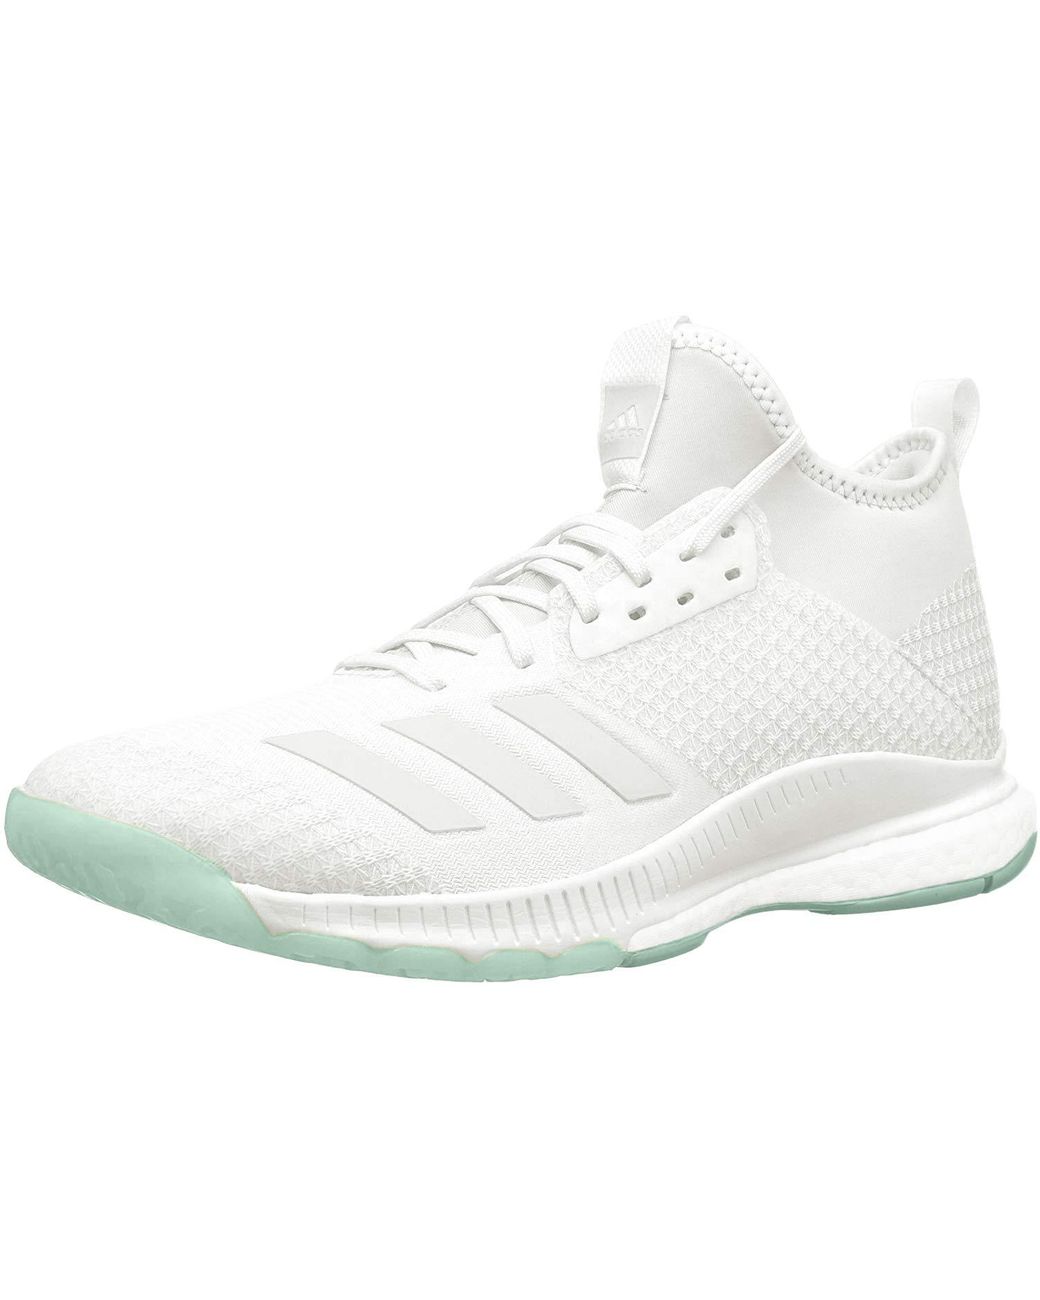 adidas Crazyflight X 2 Mid Volleyball Shoe in White | Lyst